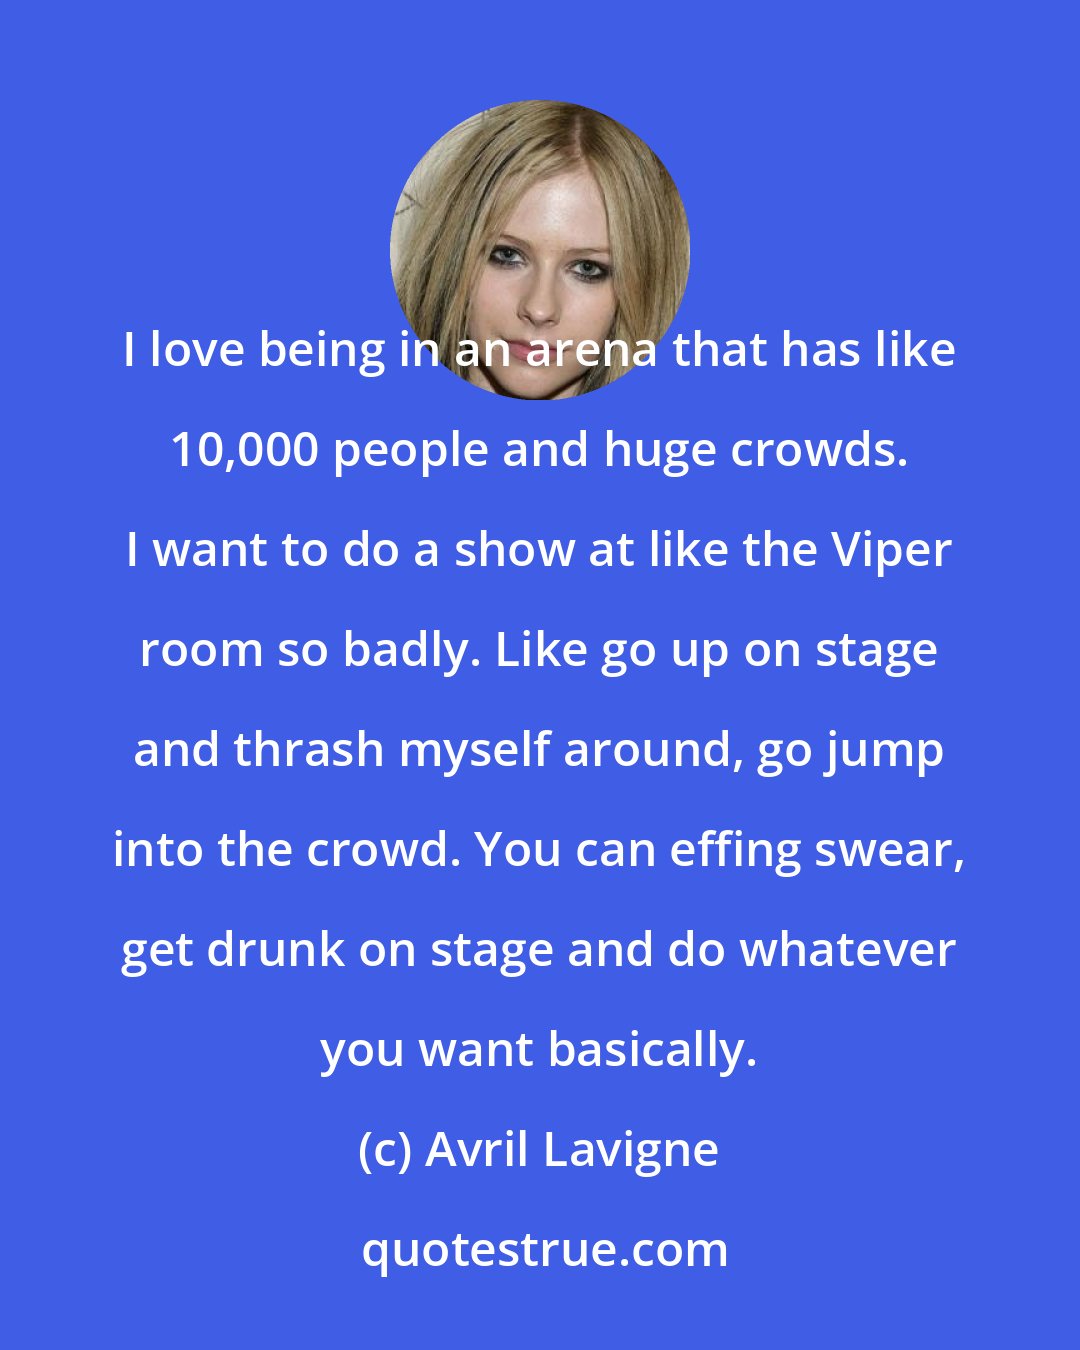 Avril Lavigne: I love being in an arena that has like 10,000 people and huge crowds. I want to do a show at like the Viper room so badly. Like go up on stage and thrash myself around, go jump into the crowd. You can effing swear, get drunk on stage and do whatever you want basically.